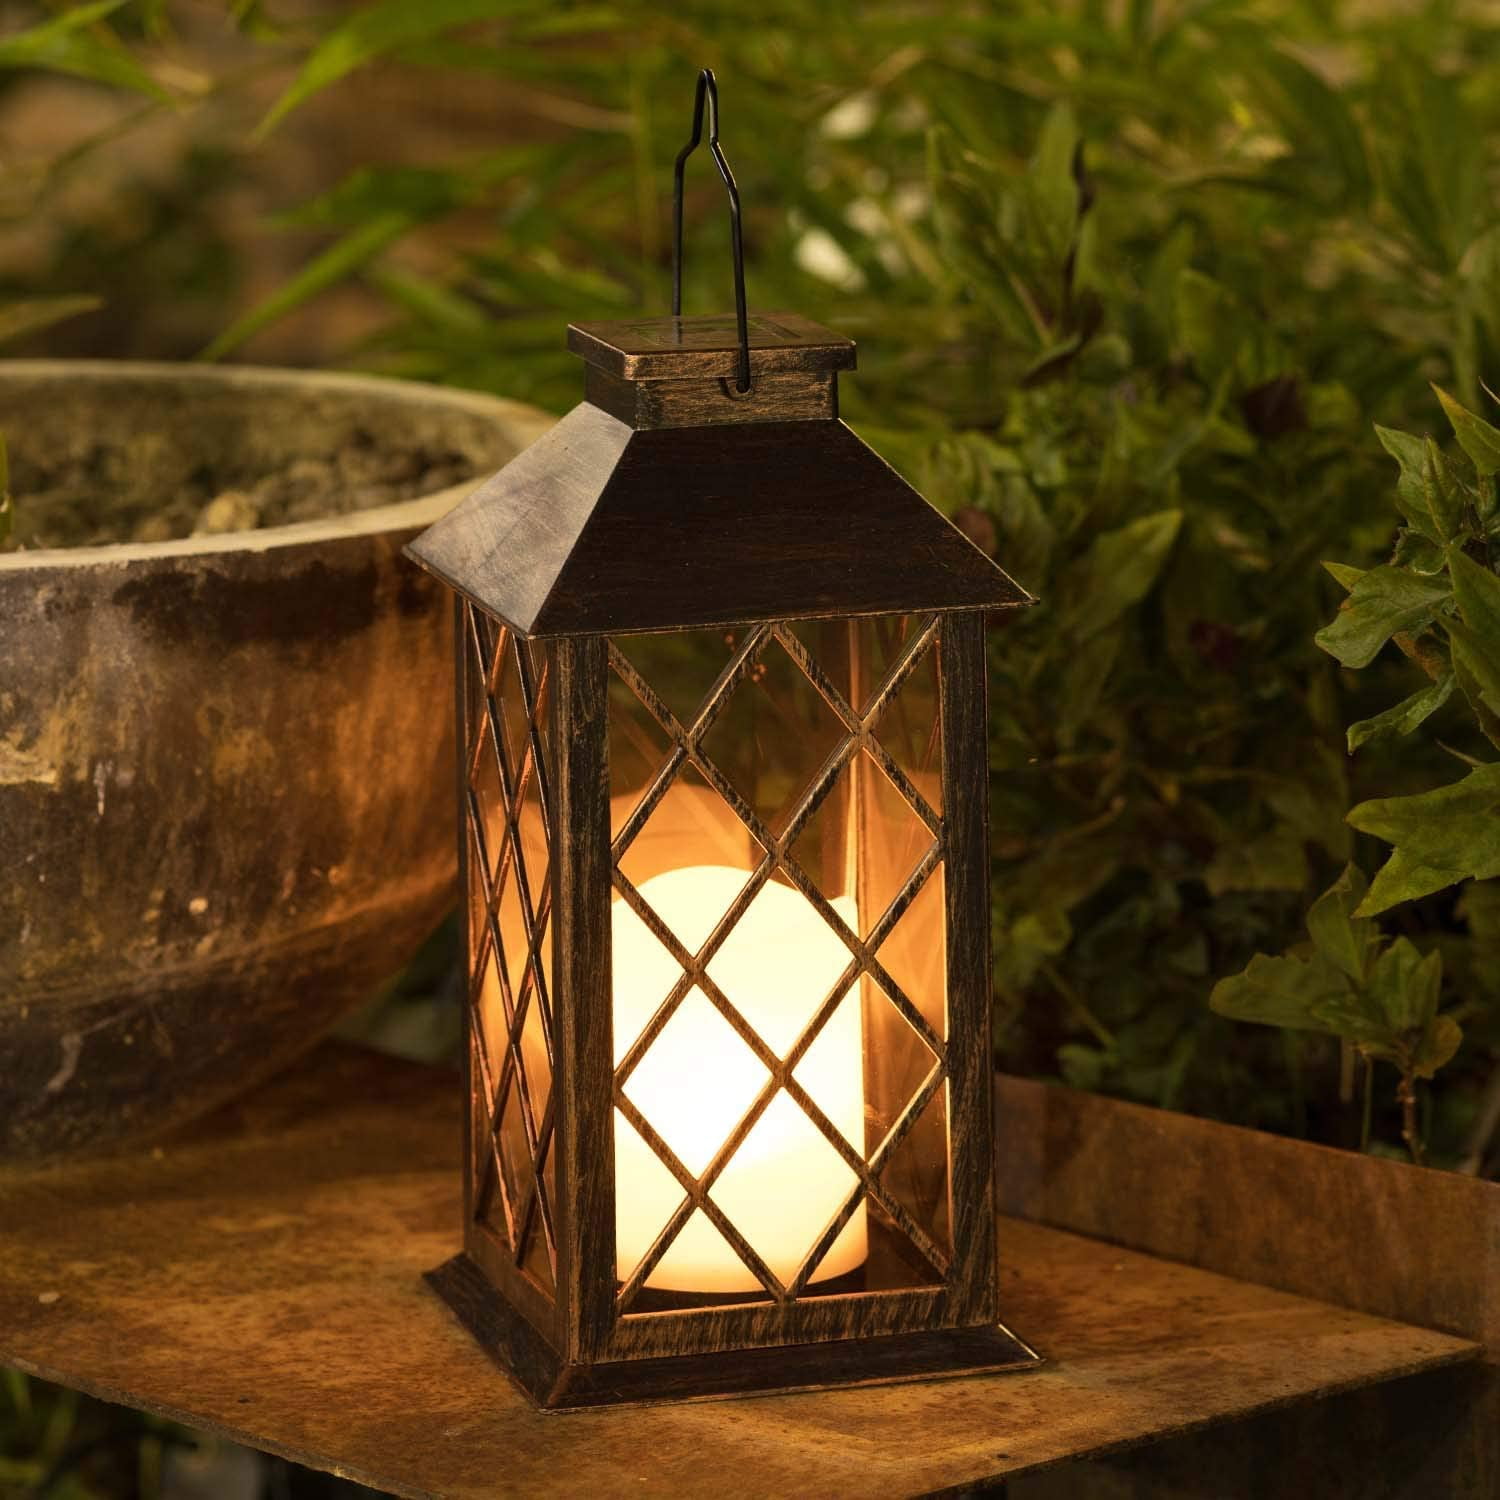 4-in-1 Dual Solar Flickering Lantern Lamp Stand Stake & Wall Mount Outdoor Light